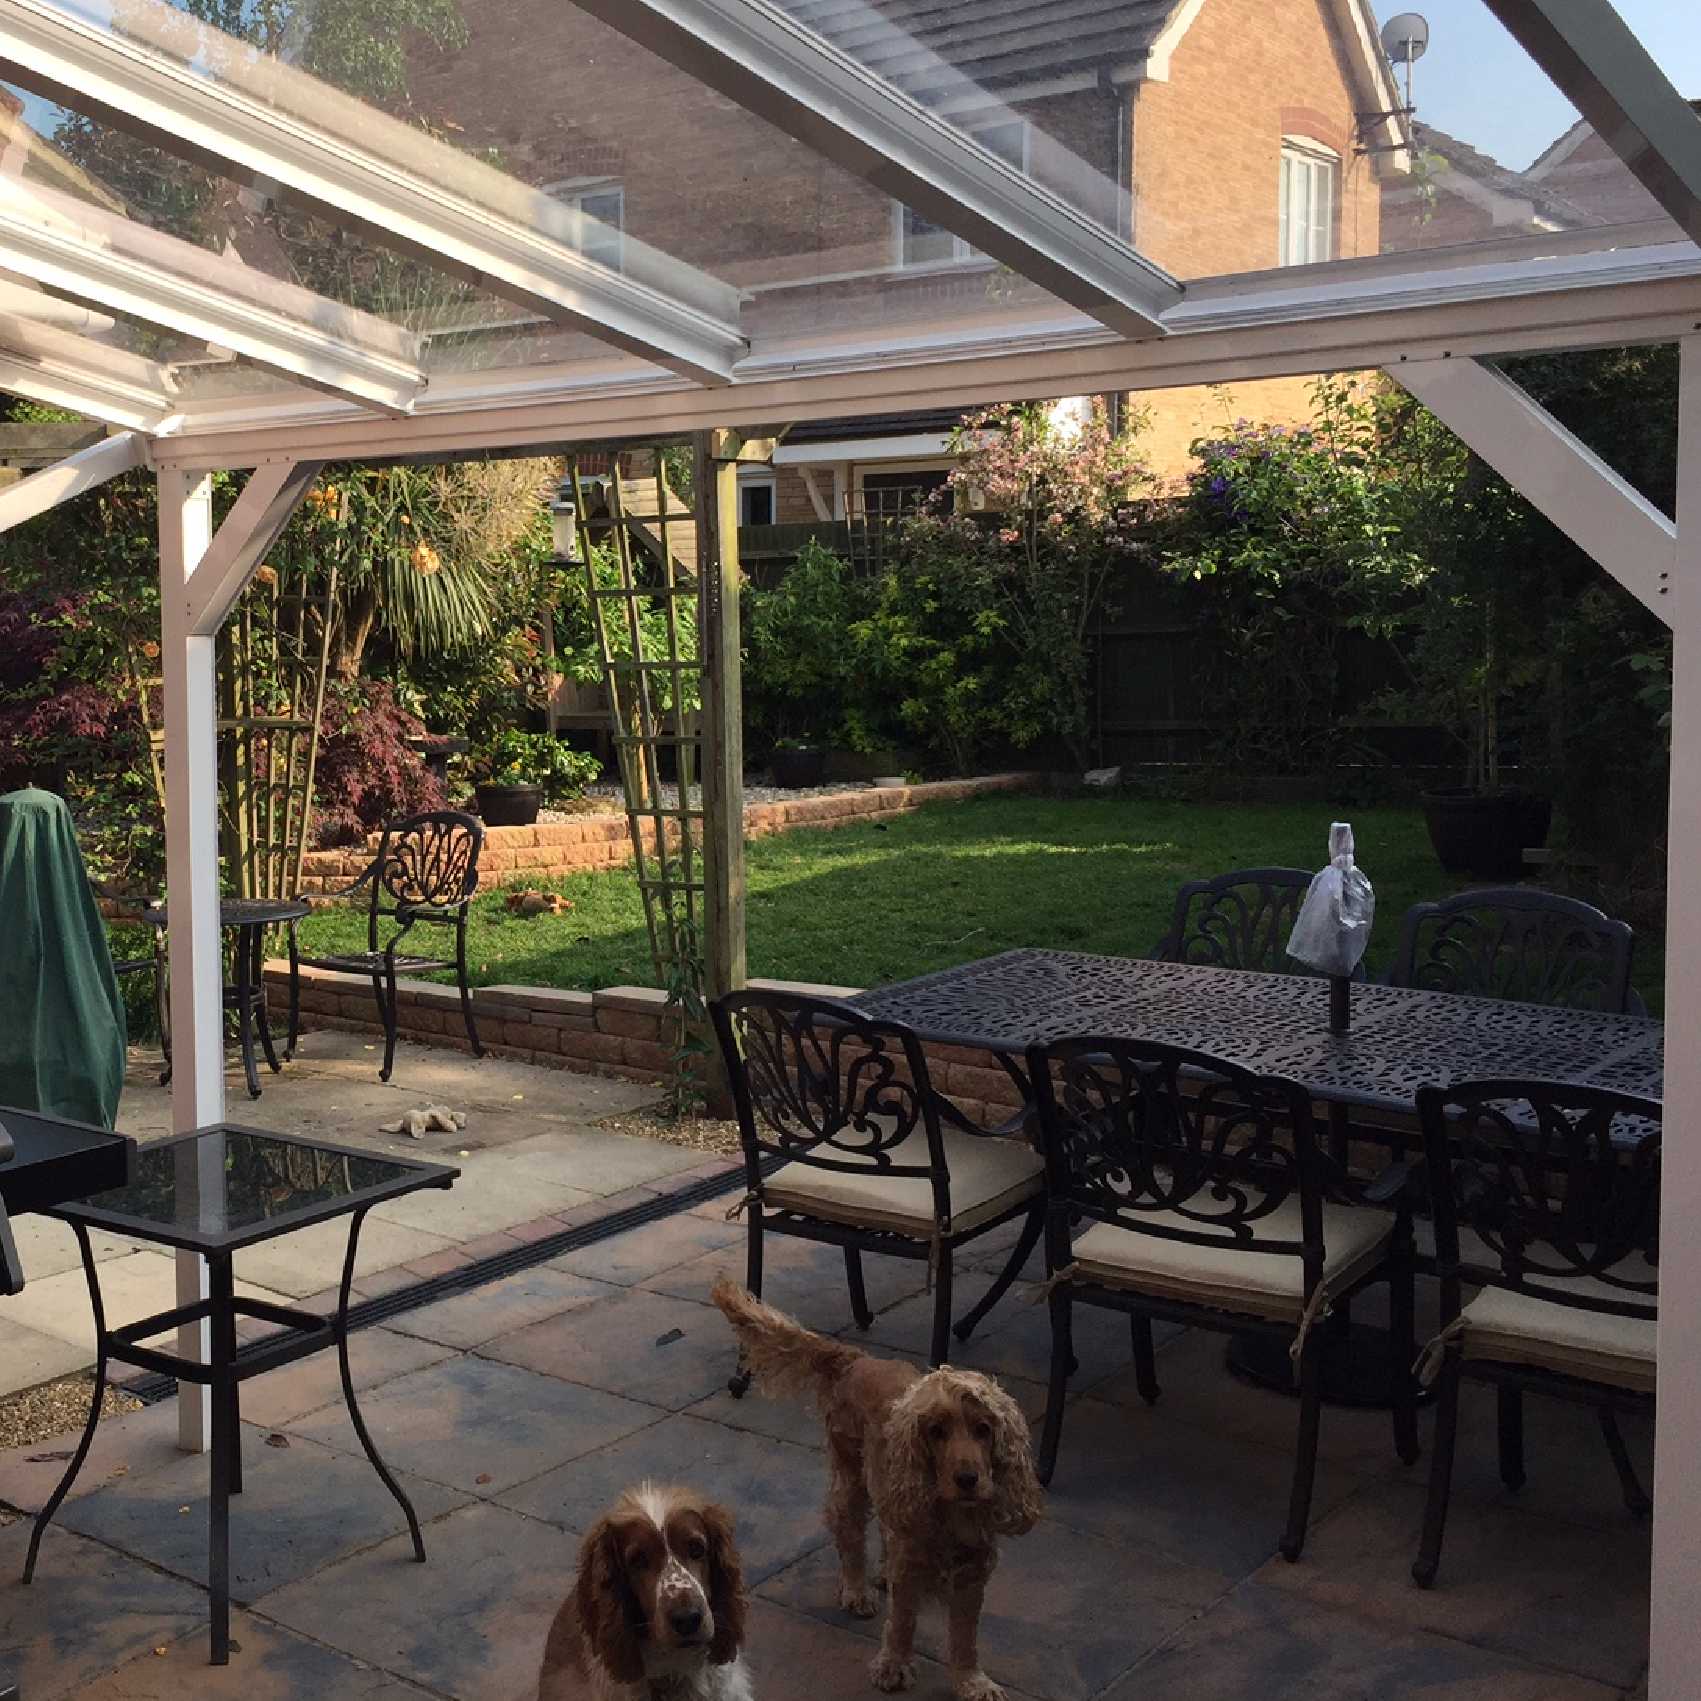 Affordable Omega Smart Lean-To Canopy, White UNGLAZED for 6mm Glazing - 6.3m (W) x 2.5m (P), (4) Supporting Posts